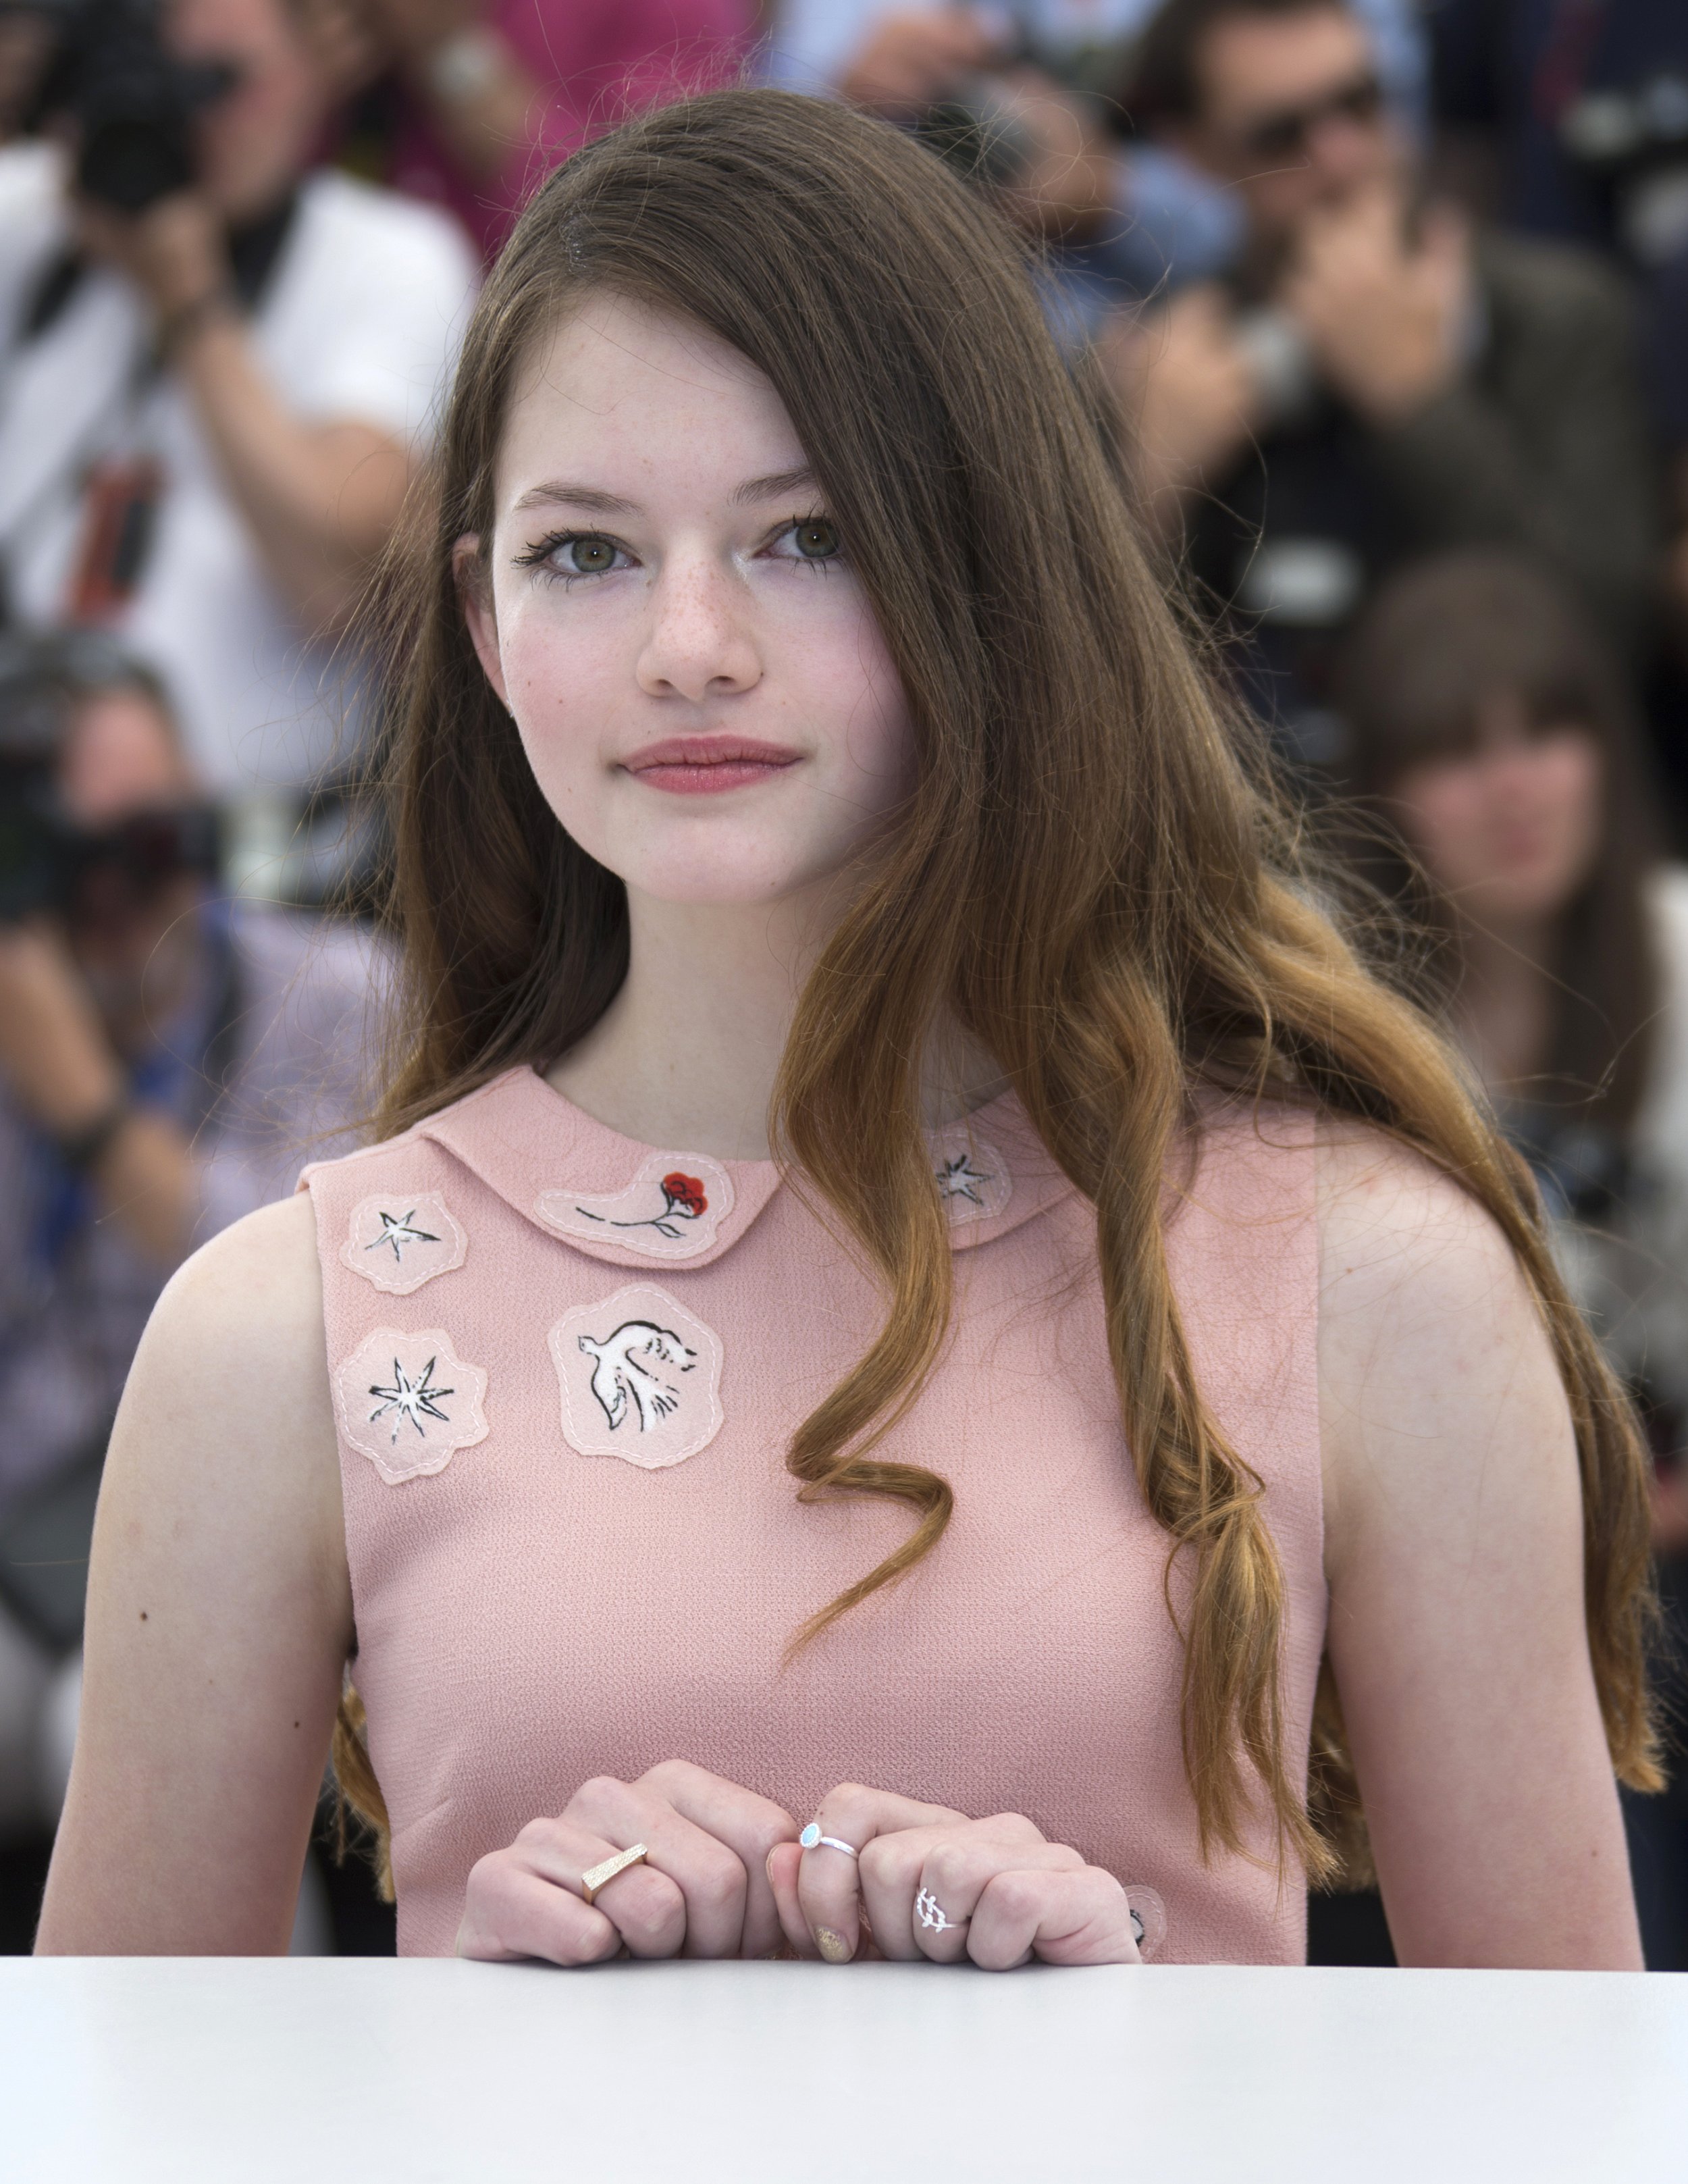 Mackenzie Foy, Actress Who Played Renesmee Cullen In 'Twilight' Series,  Turns 15, Says She Wants To Direct